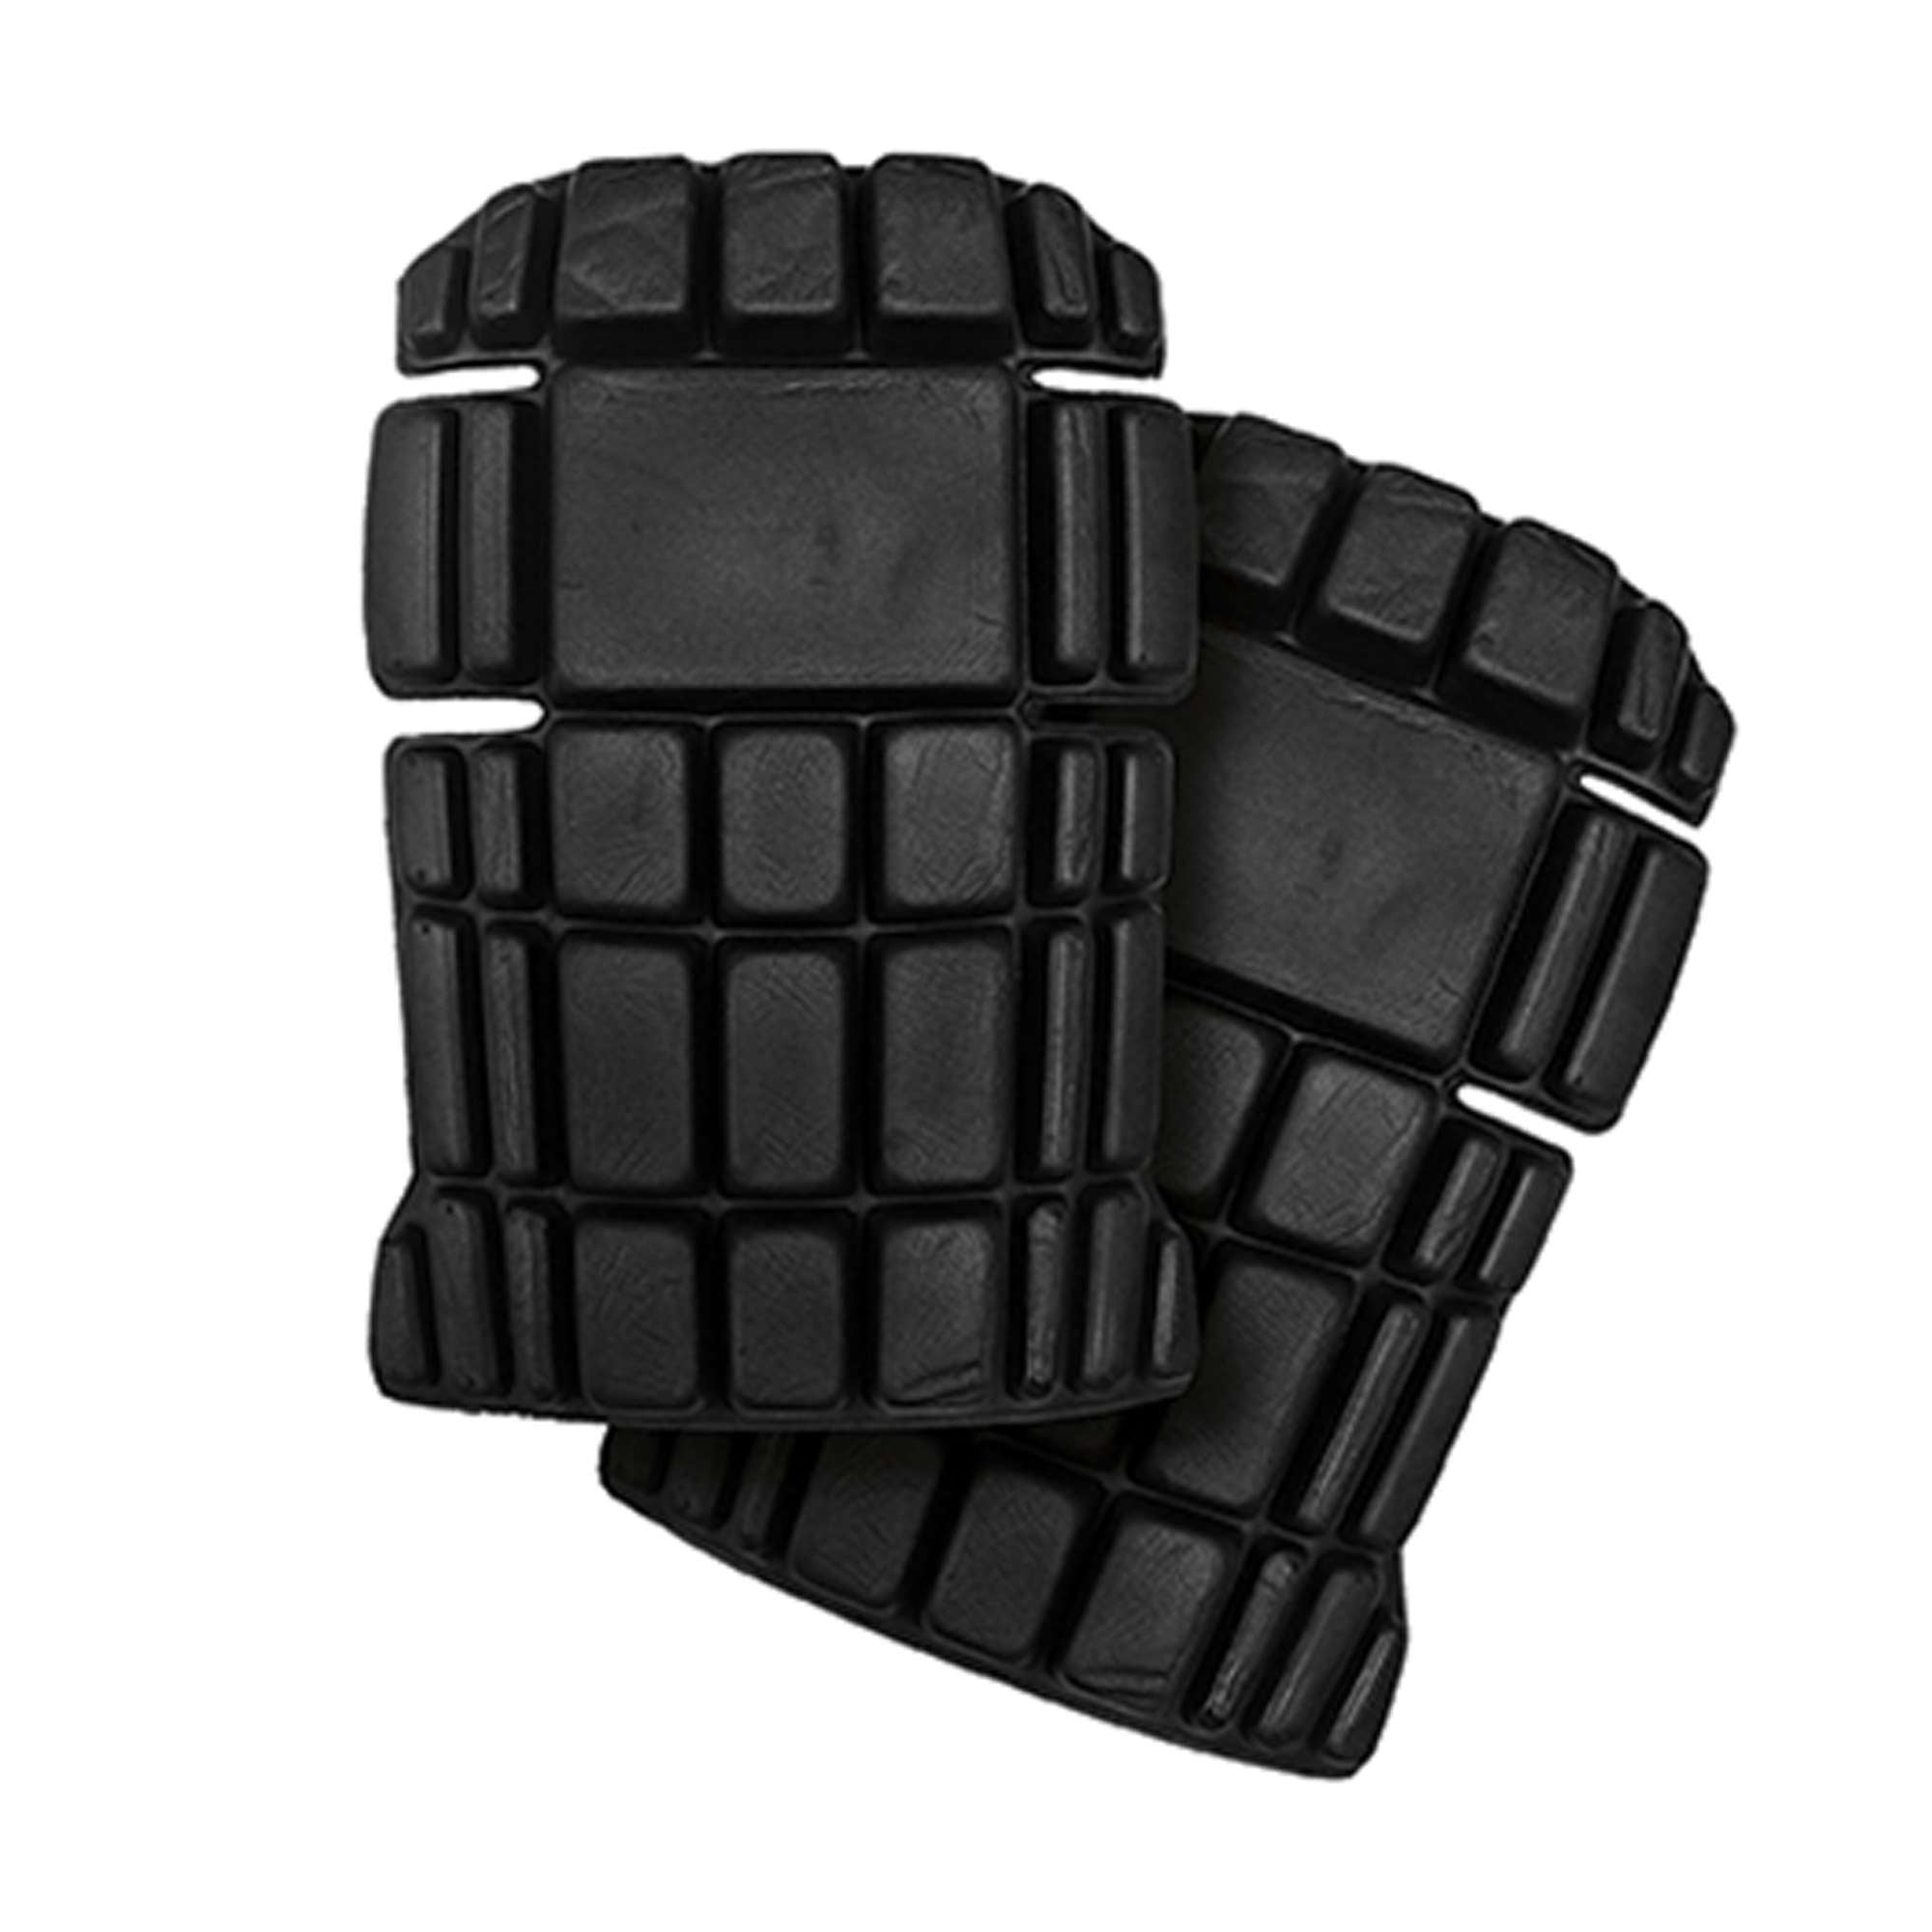 Knee pads for trousers - 25257 - Kapriol